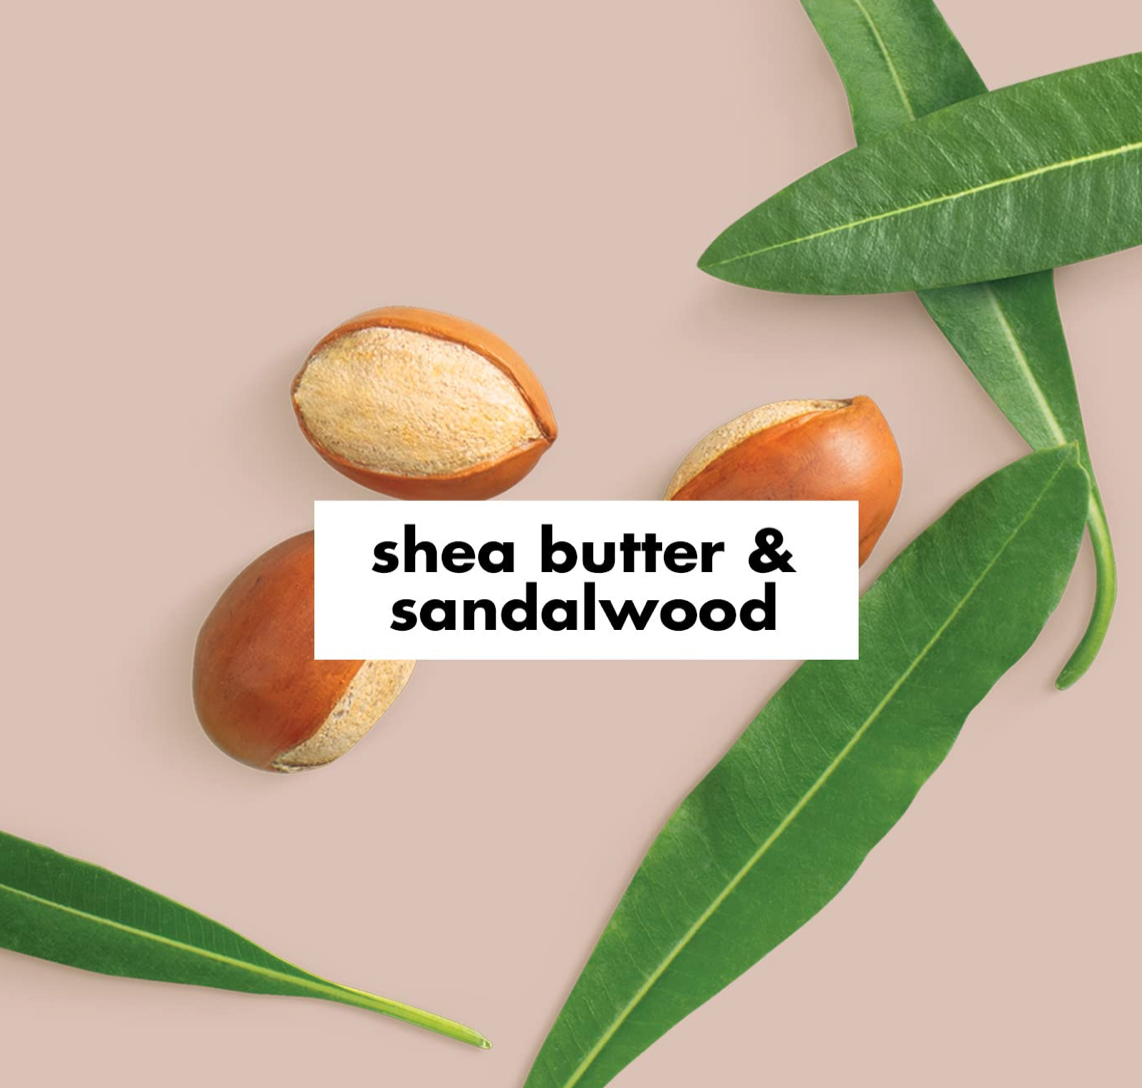 Shea Butter and Sandalwood Body Lotion